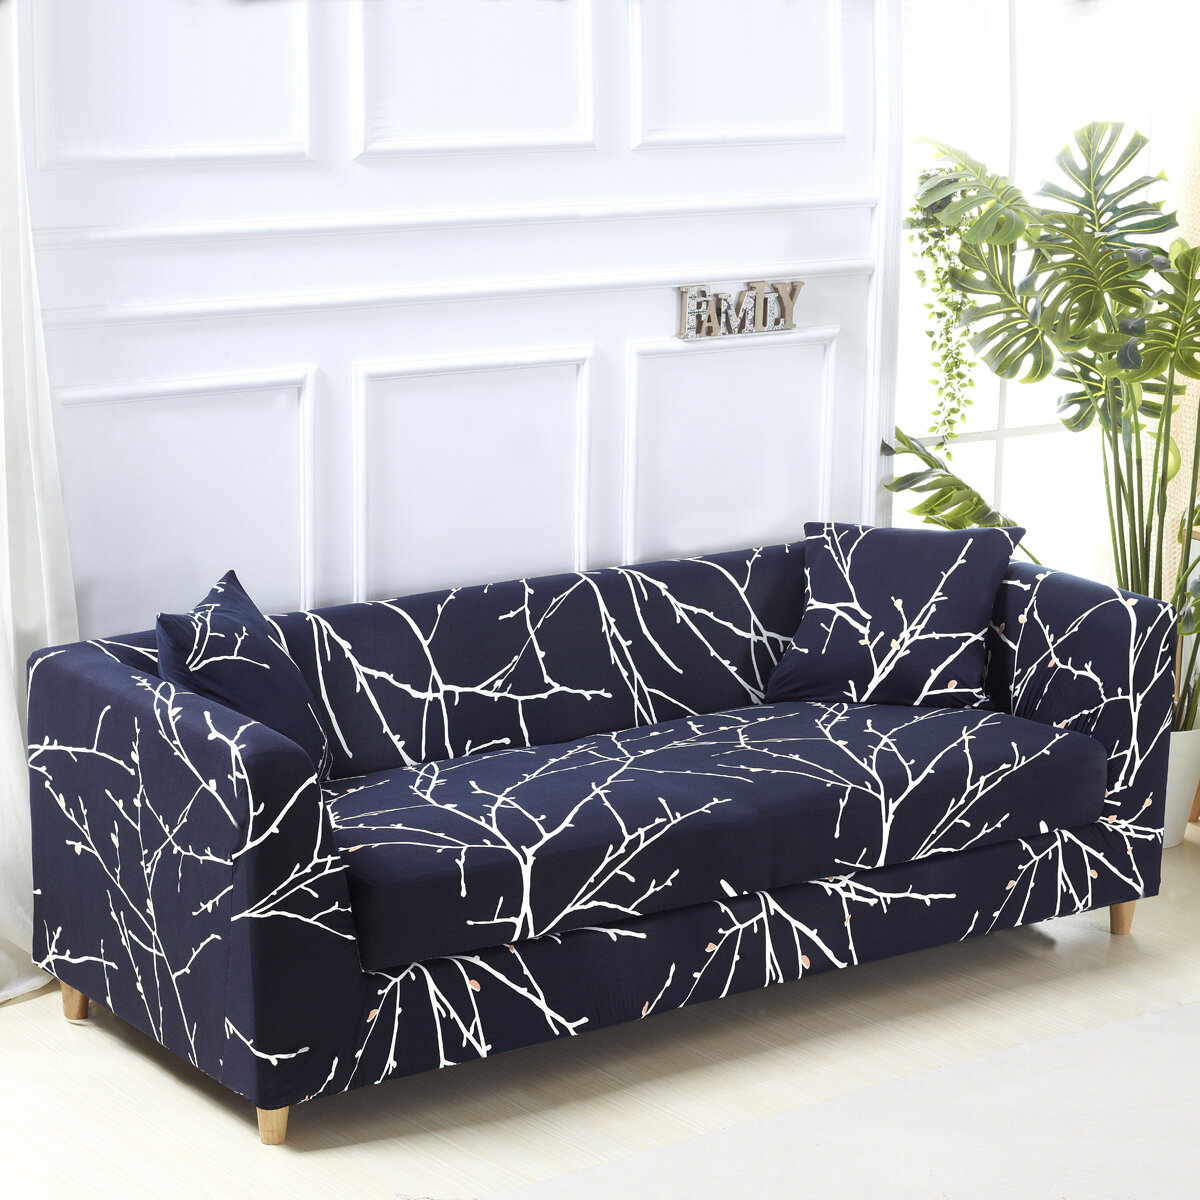 Details about   Jacquard Replacement Sofa Seat Cushion Cover Stretch Home Chair Couch Slipcover 